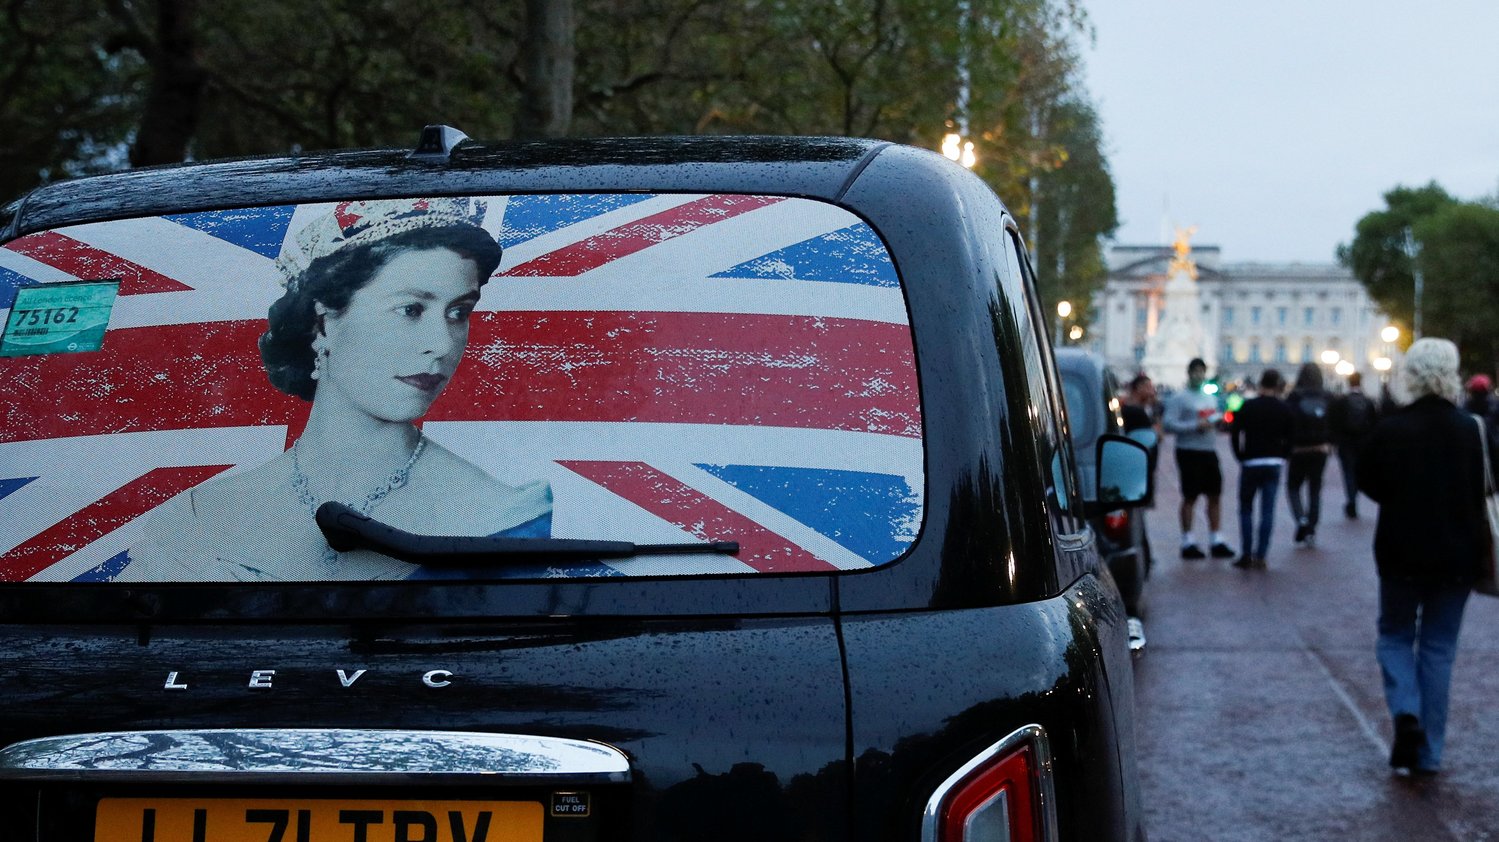 The rear window of a cab with the image of Queen Elizabeth II is pictured parked near Buckingham Palace in London Sept. 8 as people gather after the announcement that Britain’s longest-reigning monarch and the nation’s figurehead for seven decades died at the age of 96.